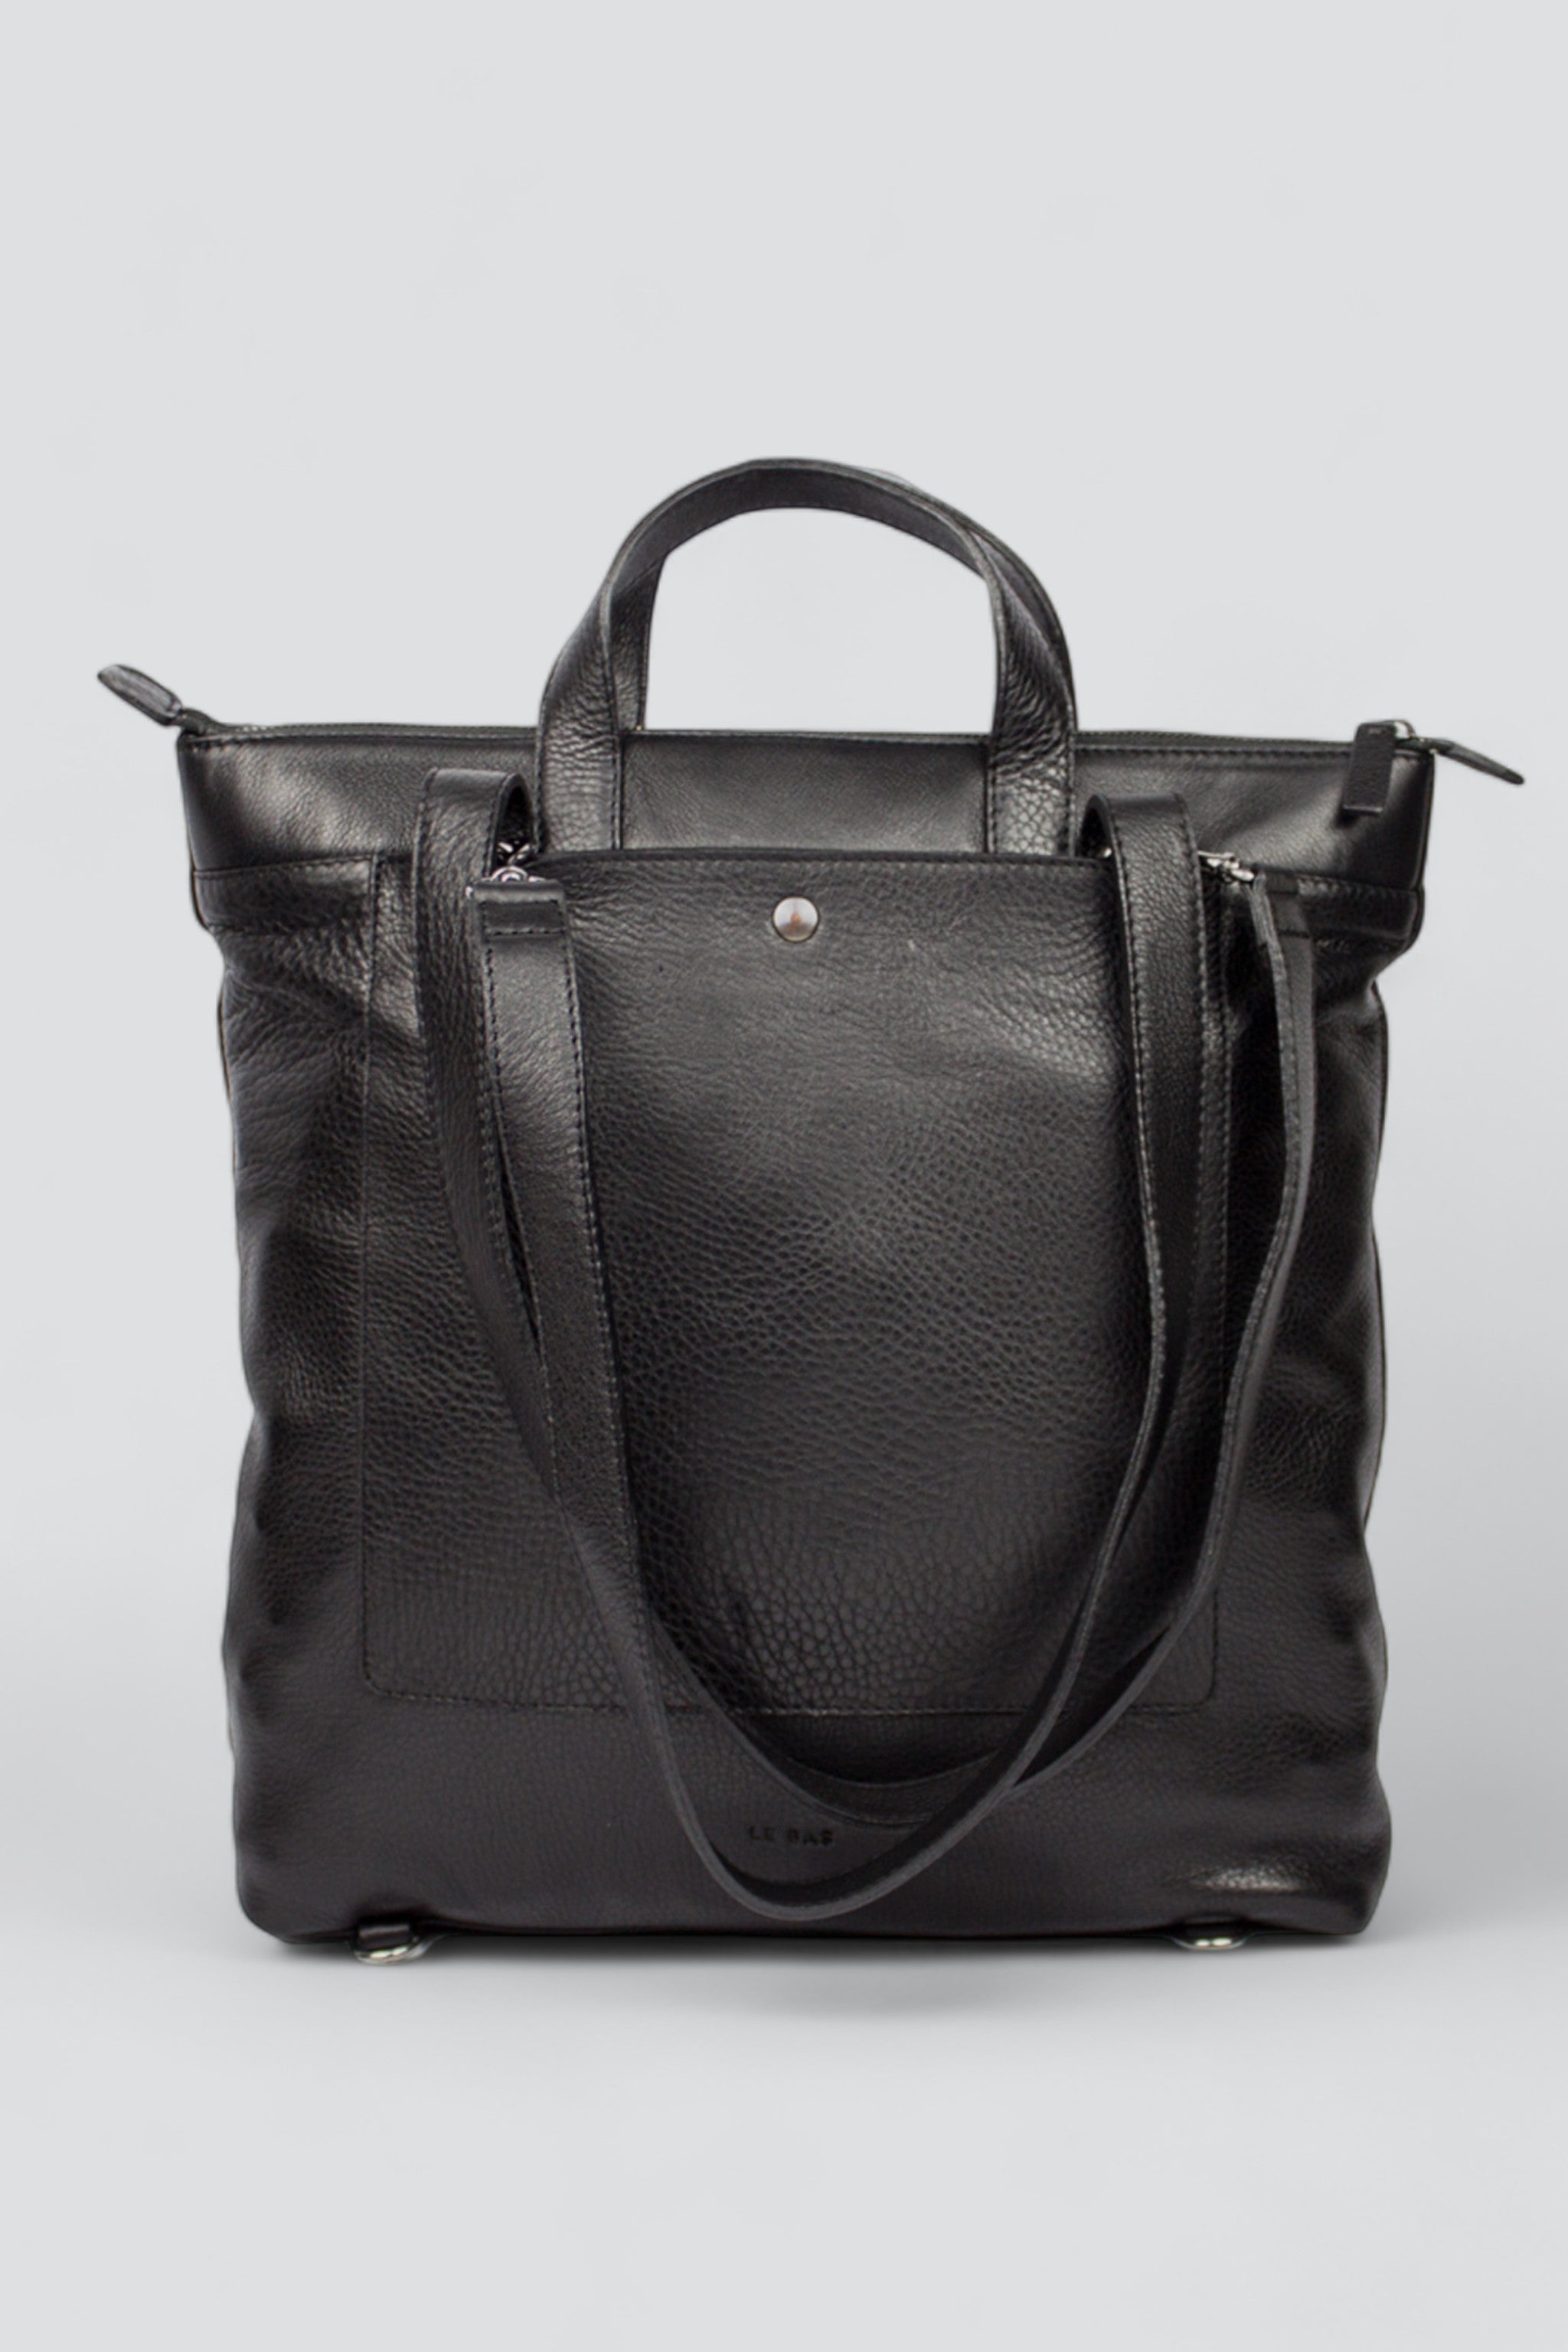 Black Leather Convertible Backpack B1